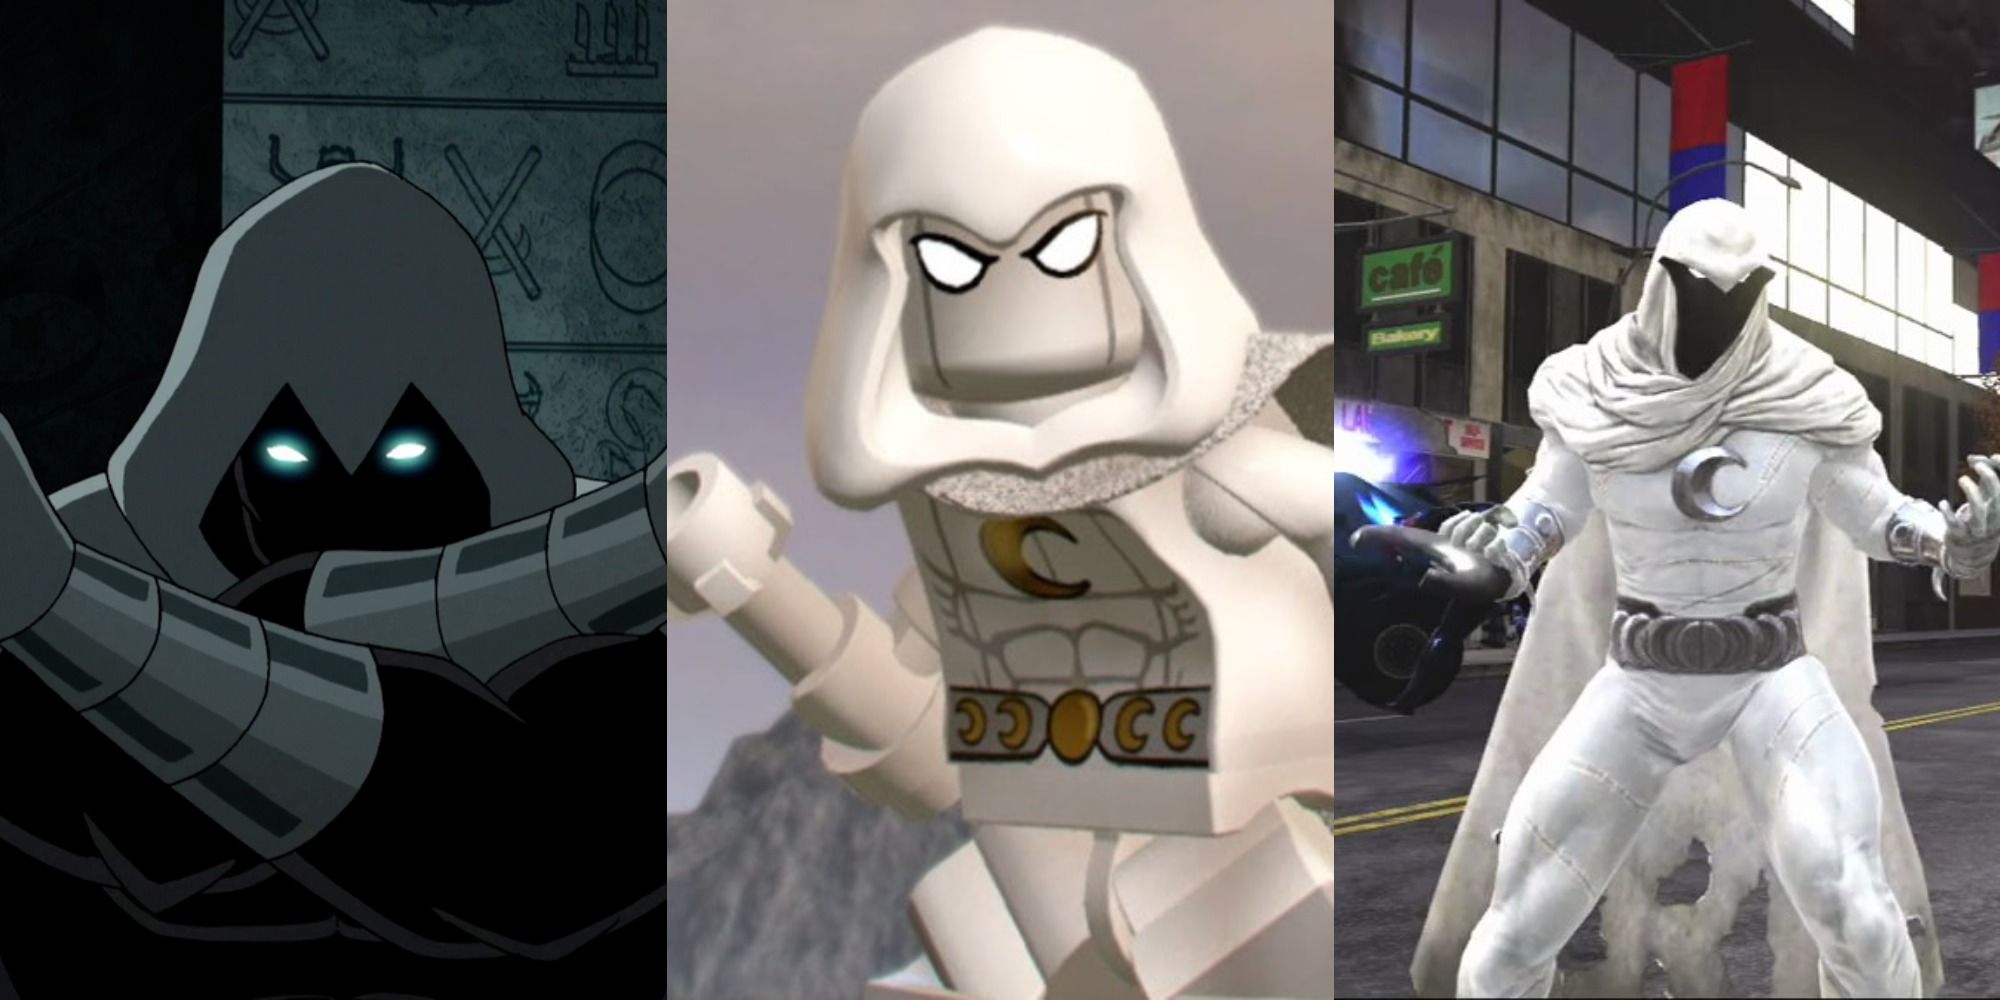 A split image of Moon Knight in an animated show, in Lego form, and in a video game